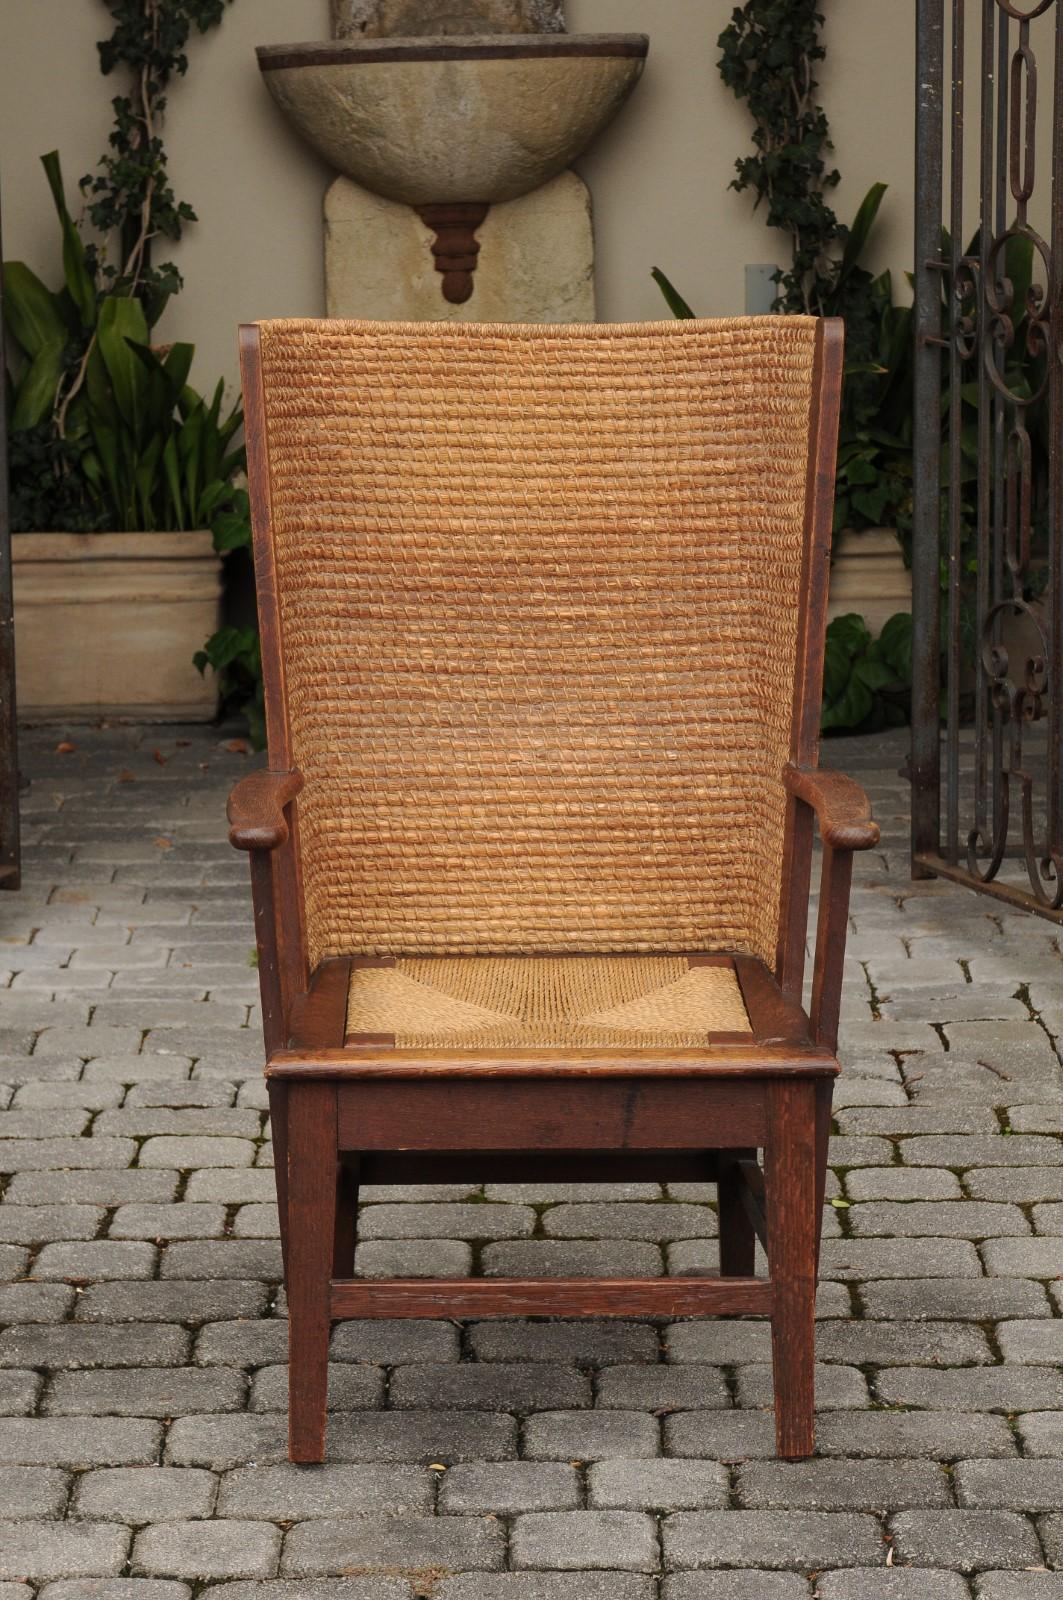 A Scottish Orkney Island oak wingback chair from the early 20th century with handwoven straw back, rush seat, open arms, straight legs and side stretchers. Born at the Turn of the Century in the archipelago of Orkney off of the northern coast of